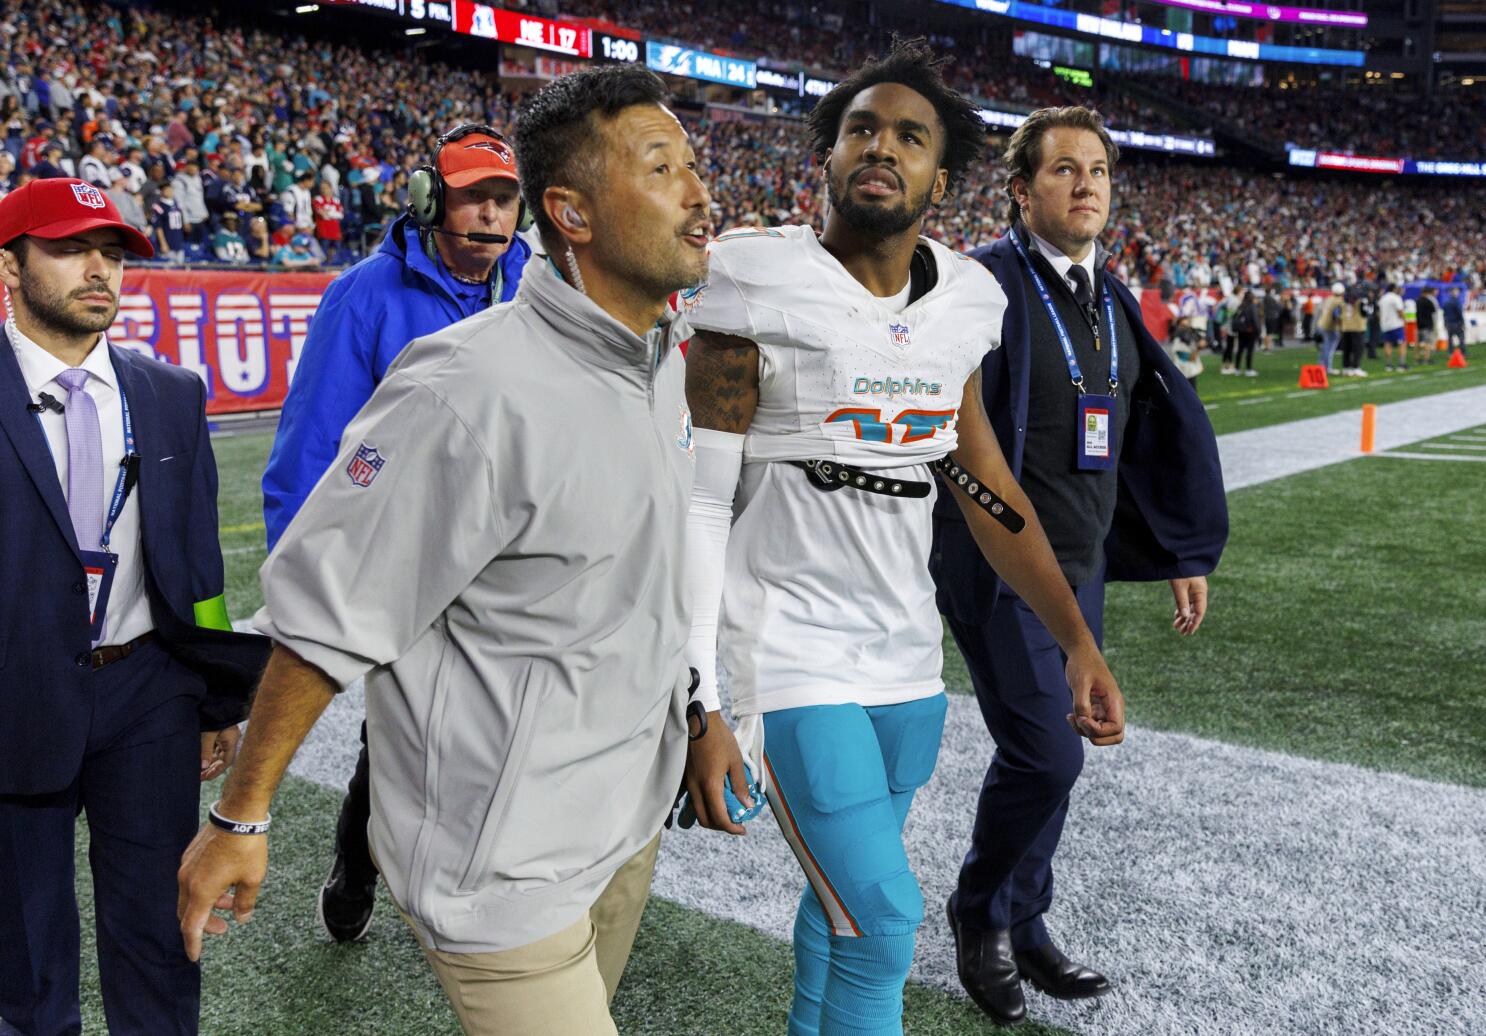 Dolphins receiver Jaylen Waddle ruled out of Sunday's game vs Broncos with  a concussion - The San Diego Union-Tribune